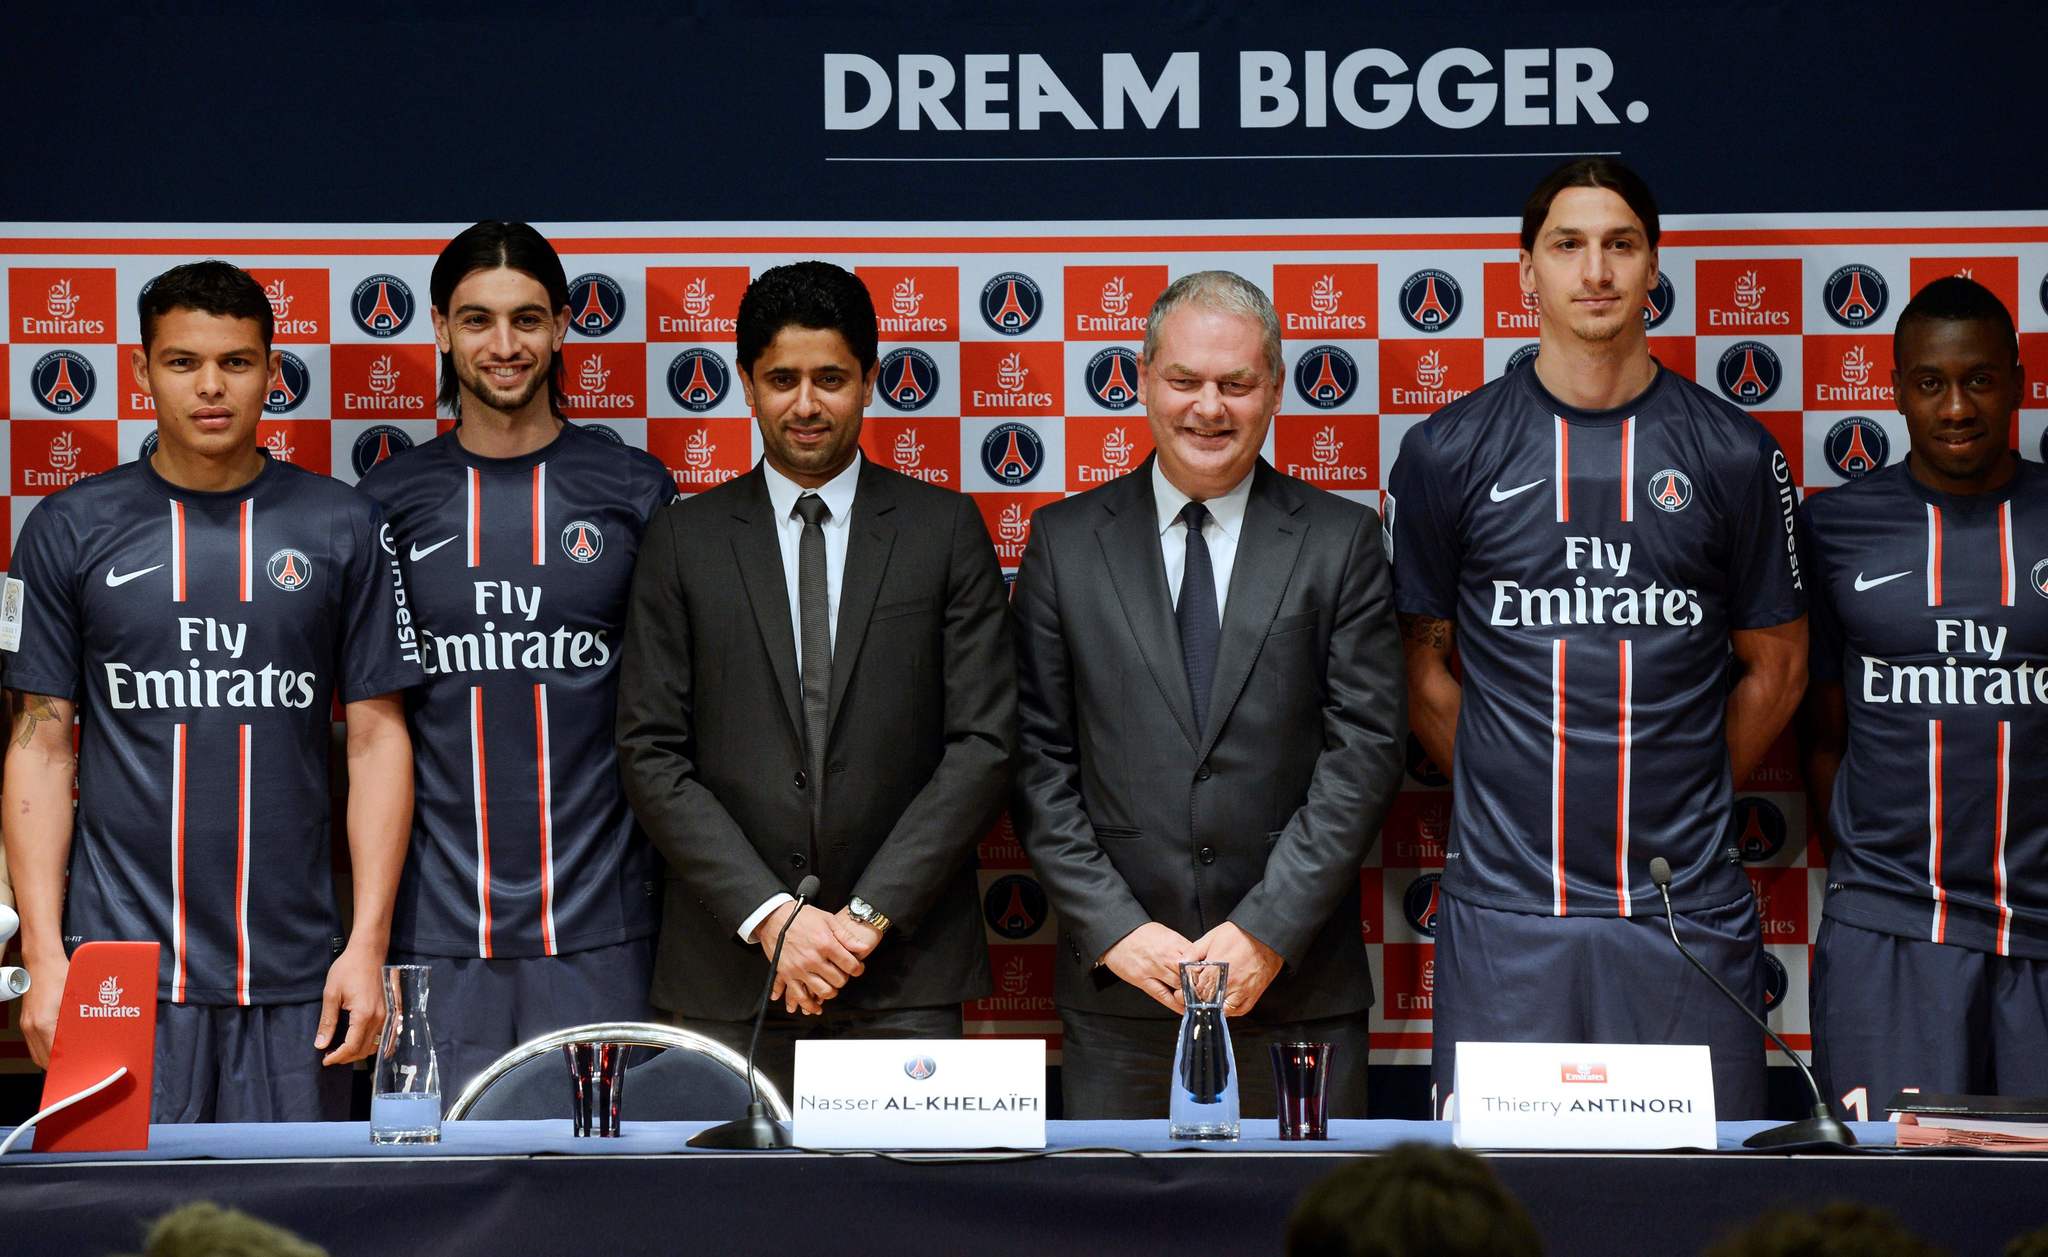 (FILES) In this file photo taken on May 17, 2013 Paris Saint-Germain ( lt;HIT gt;PSG lt;/HIT gt;)s Brazilian defender and captain Thiago Silva, Argentinian midfielder Javier lt;HIT gt;Pastore lt;/HIT gt;, lt;HIT gt;PSG lt;/HIT gt; football clubs chairman Nasser Al-Khelaifi and, Executive Vice President of Emirates company Thierry Antinori, lt;HIT gt;PSG lt;/HIT gt;s Swedish forward Zlatan Ibrahimovi? and French midfielder Blaise Matuidi pose during a press conference at the Parc des Princes stadium in Paris. - With a bling-bling image, repeated crises and outstanding successes: officially born on August 12, 1970 in order to become the "big club" that was missing in Paris, the Paris Saint-Germain will celebrate its fiftieth anniversary on Wednesday, during the UEFA Champions league quarter against Atalanta. (Photo by Bertrand GUAY / AFP)